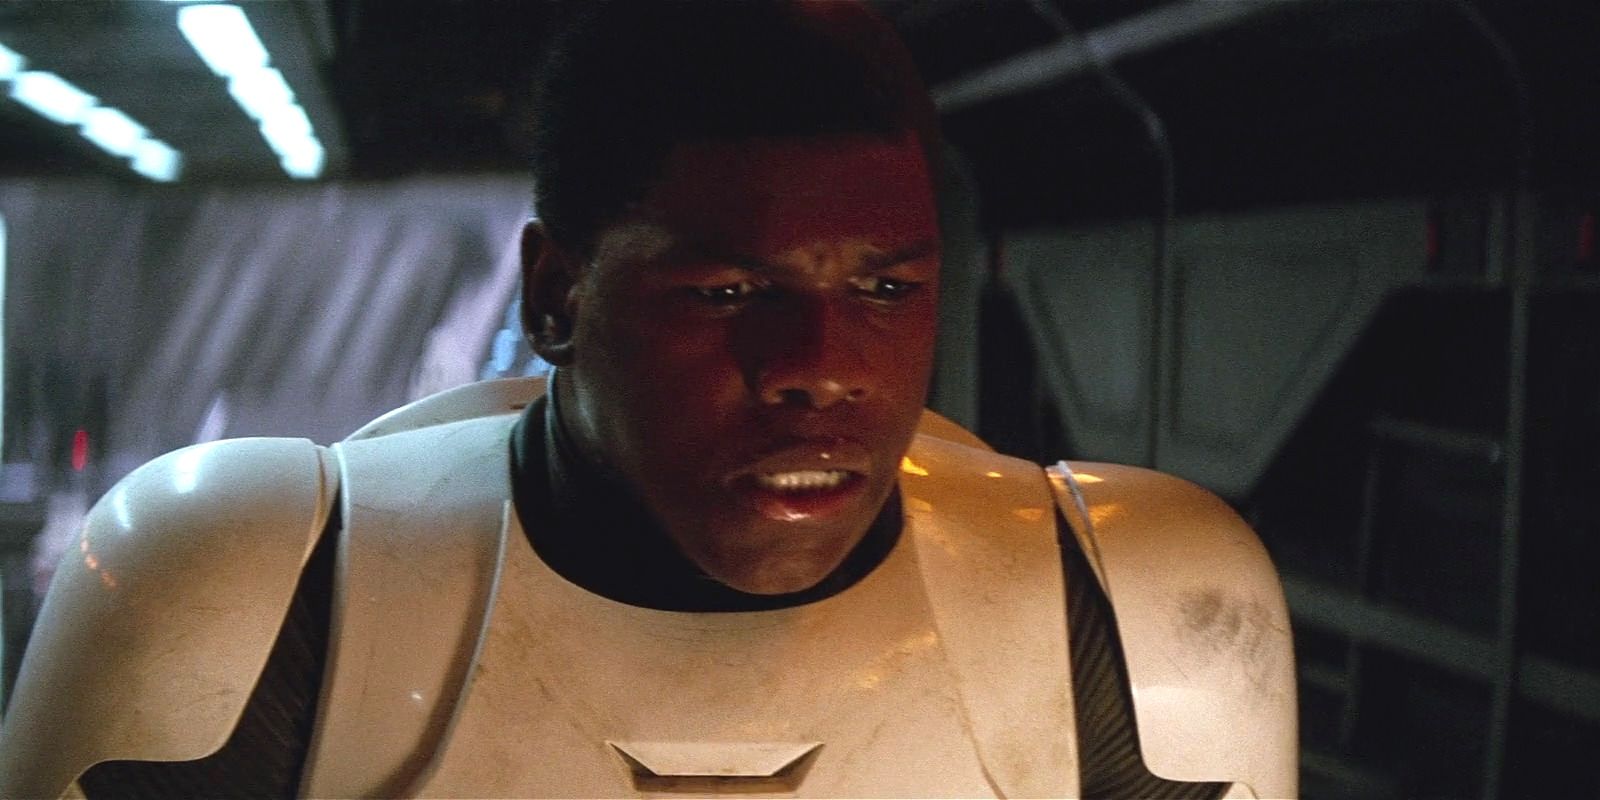 10 Reasons Why Finn Should Have Been A Jedi In The Sequel Trilogy